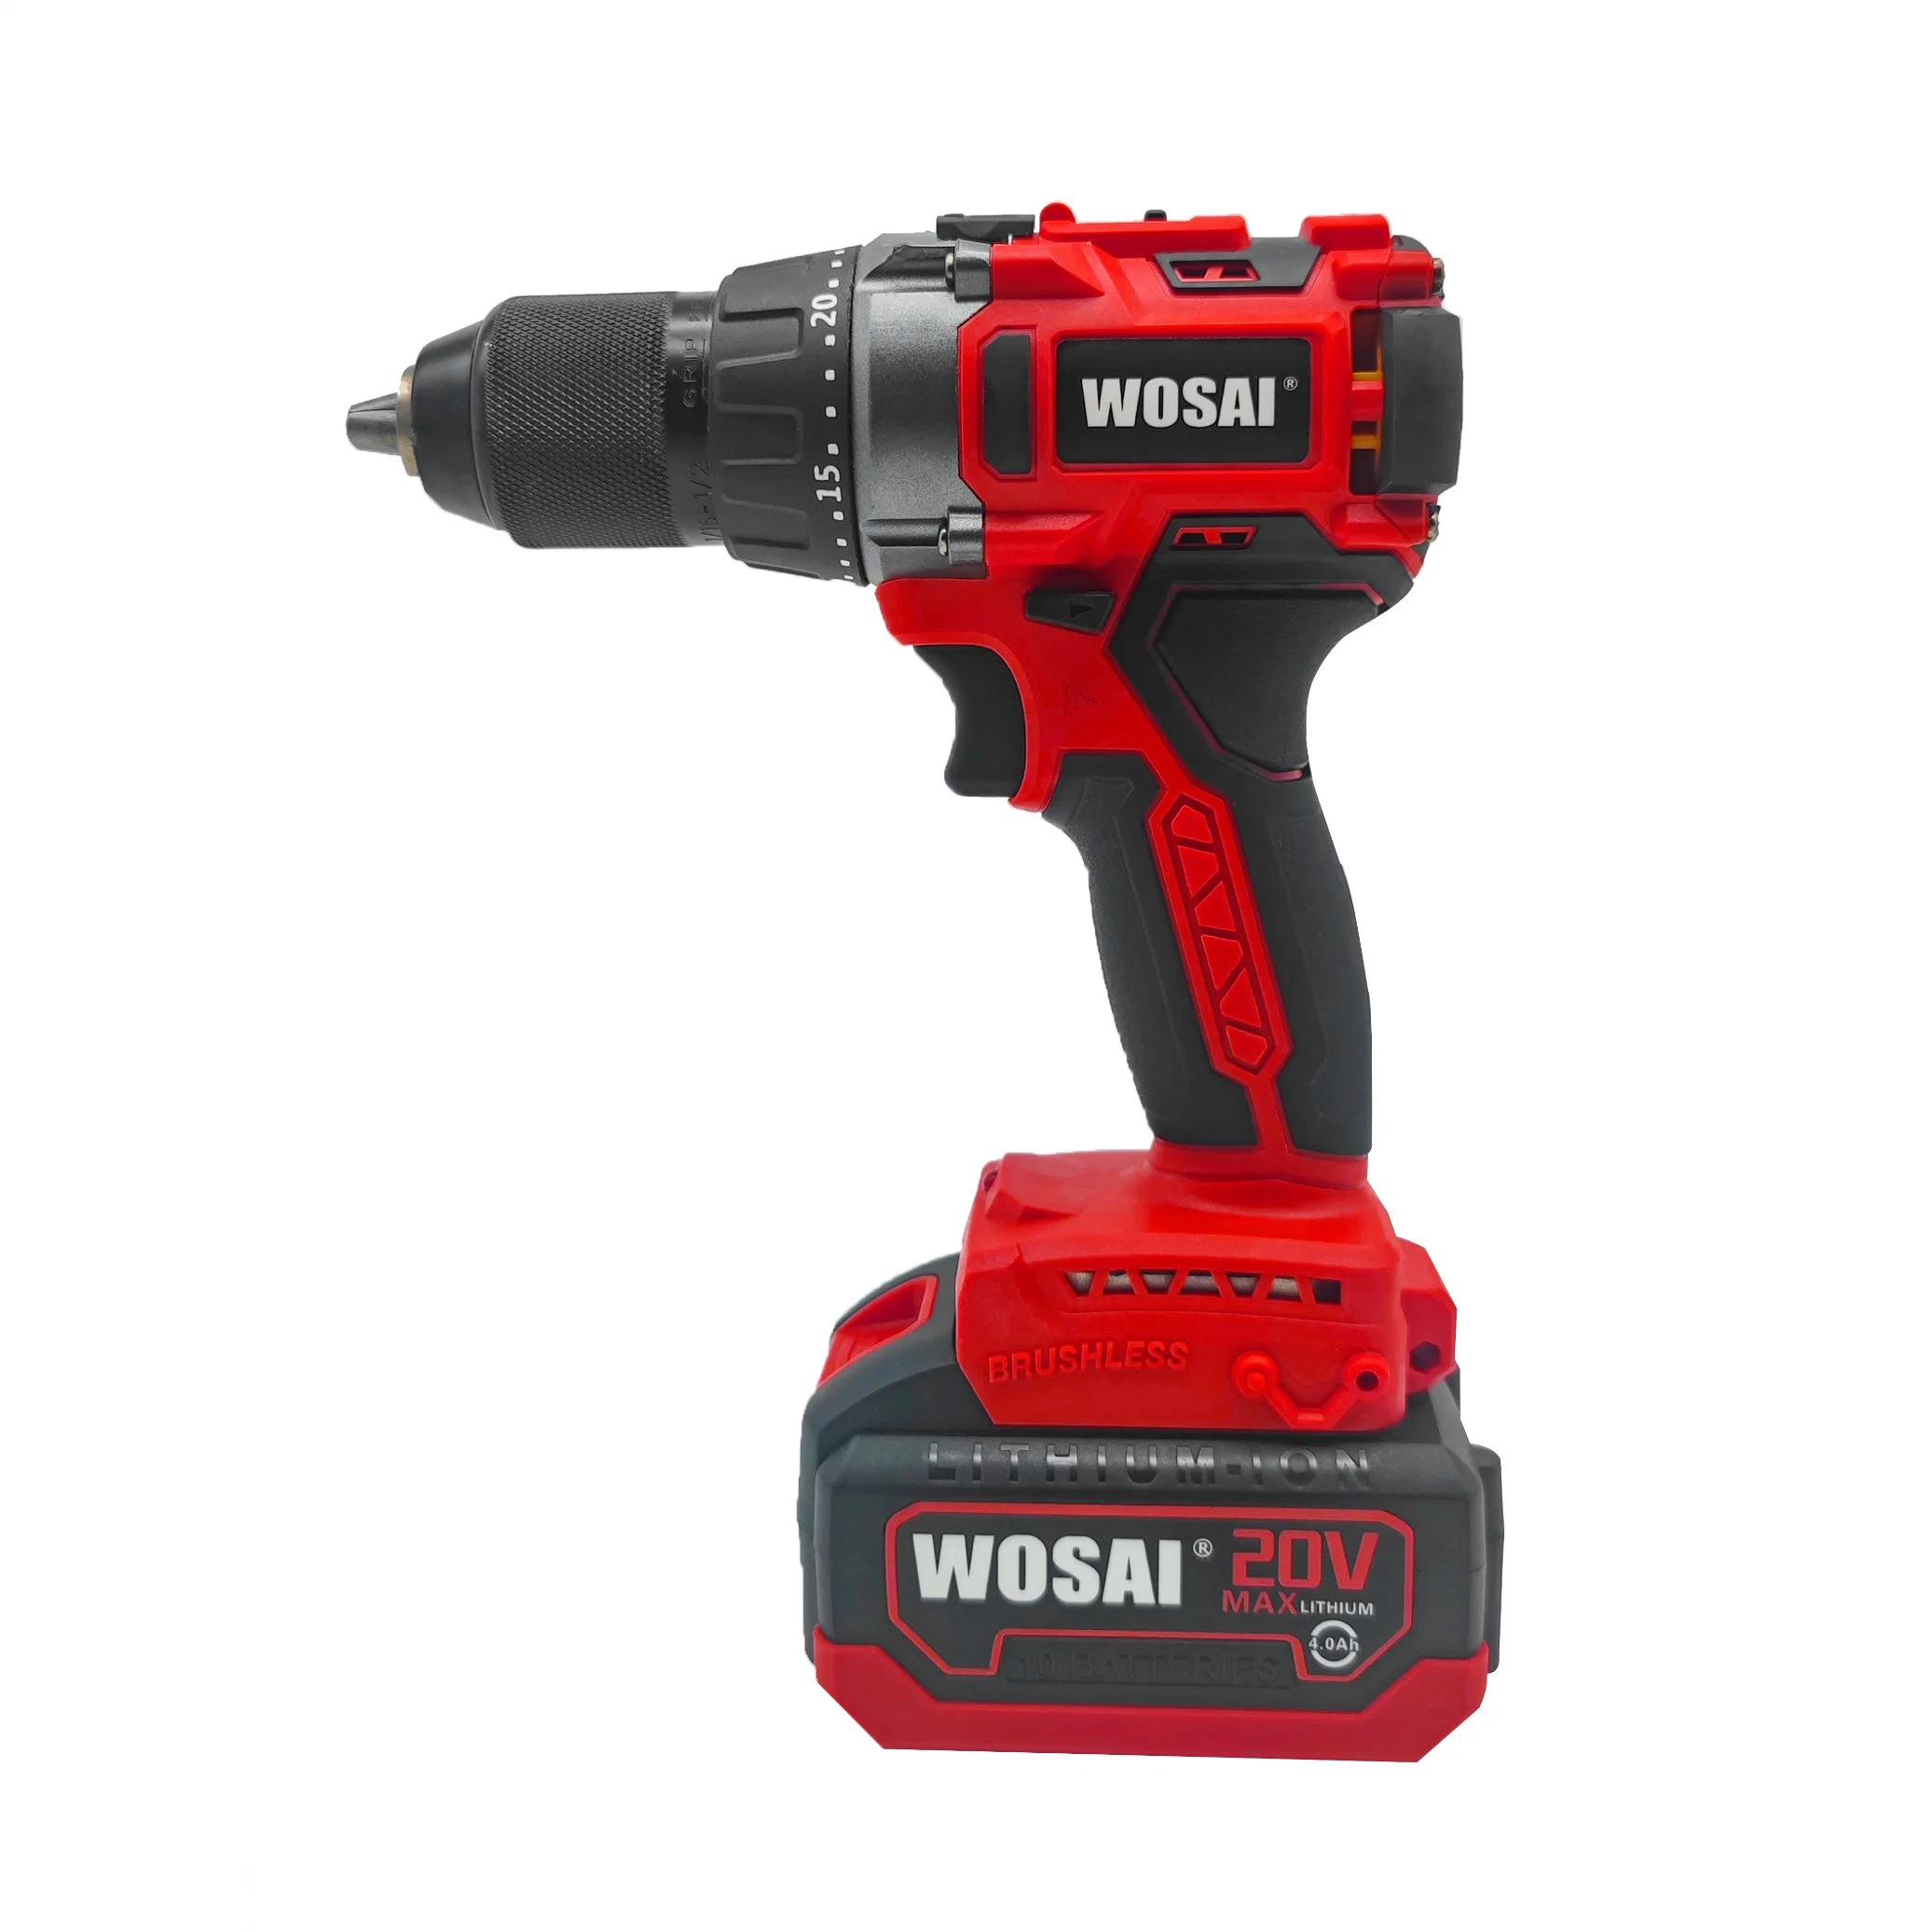 Wosai 20V Brushless Cordless Power Tools Hand Lithium-Ion Battery Heavy Duty 13mm Drill